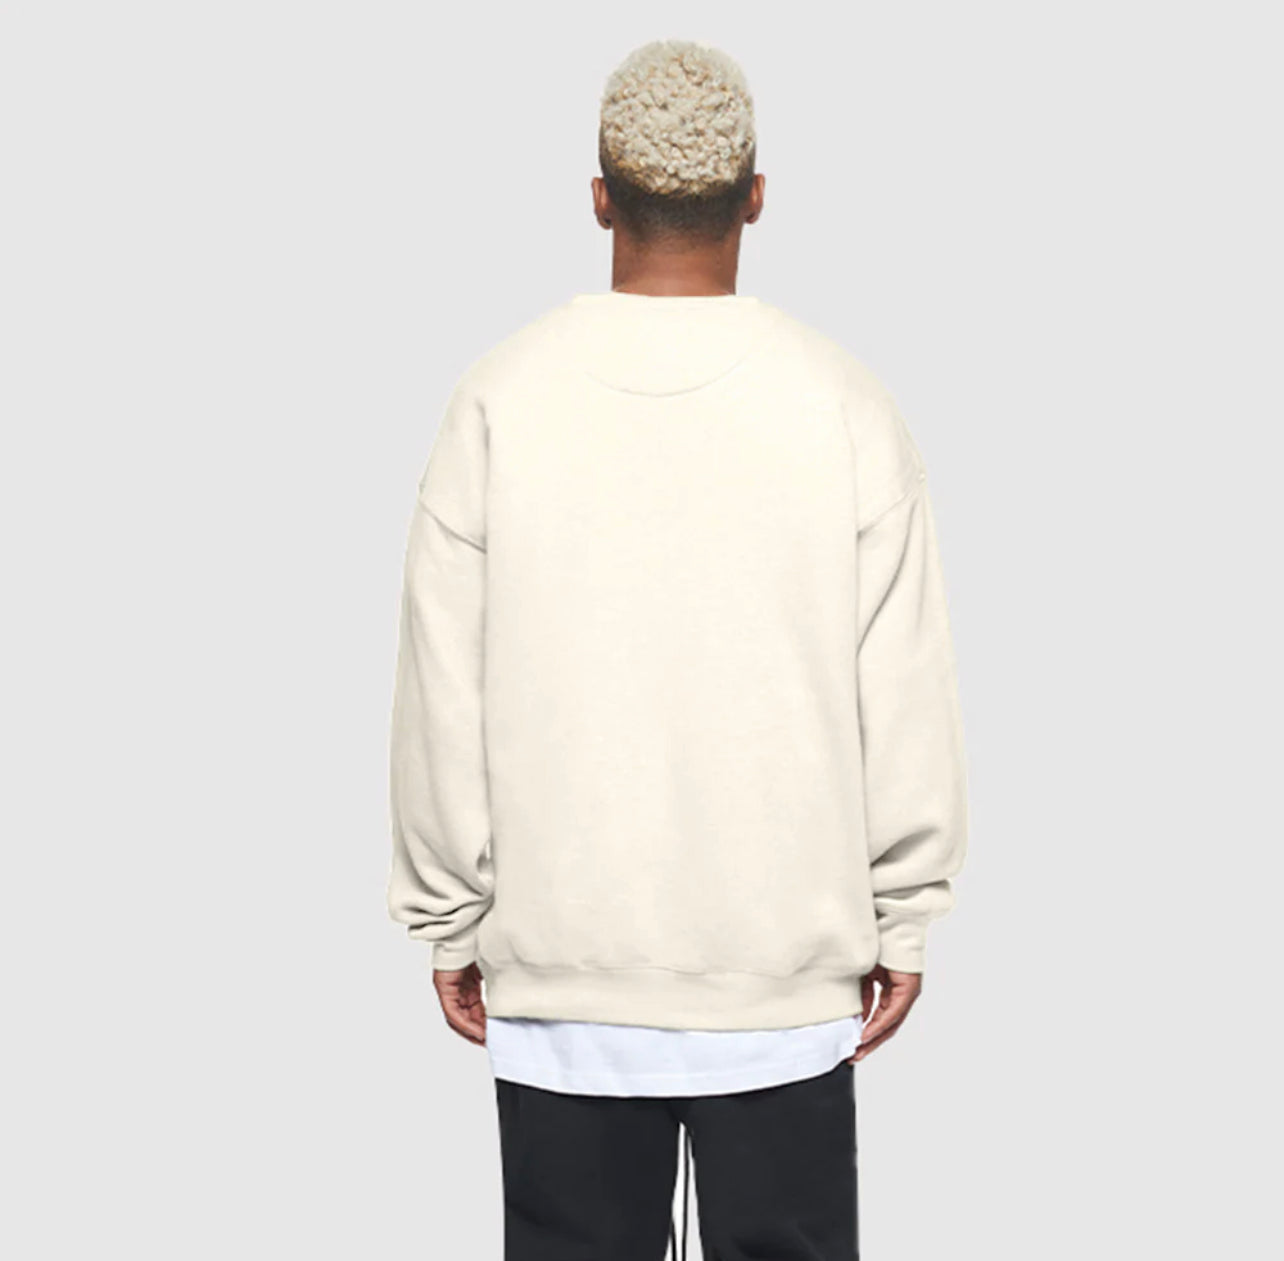 Off-white Saintly Pullover